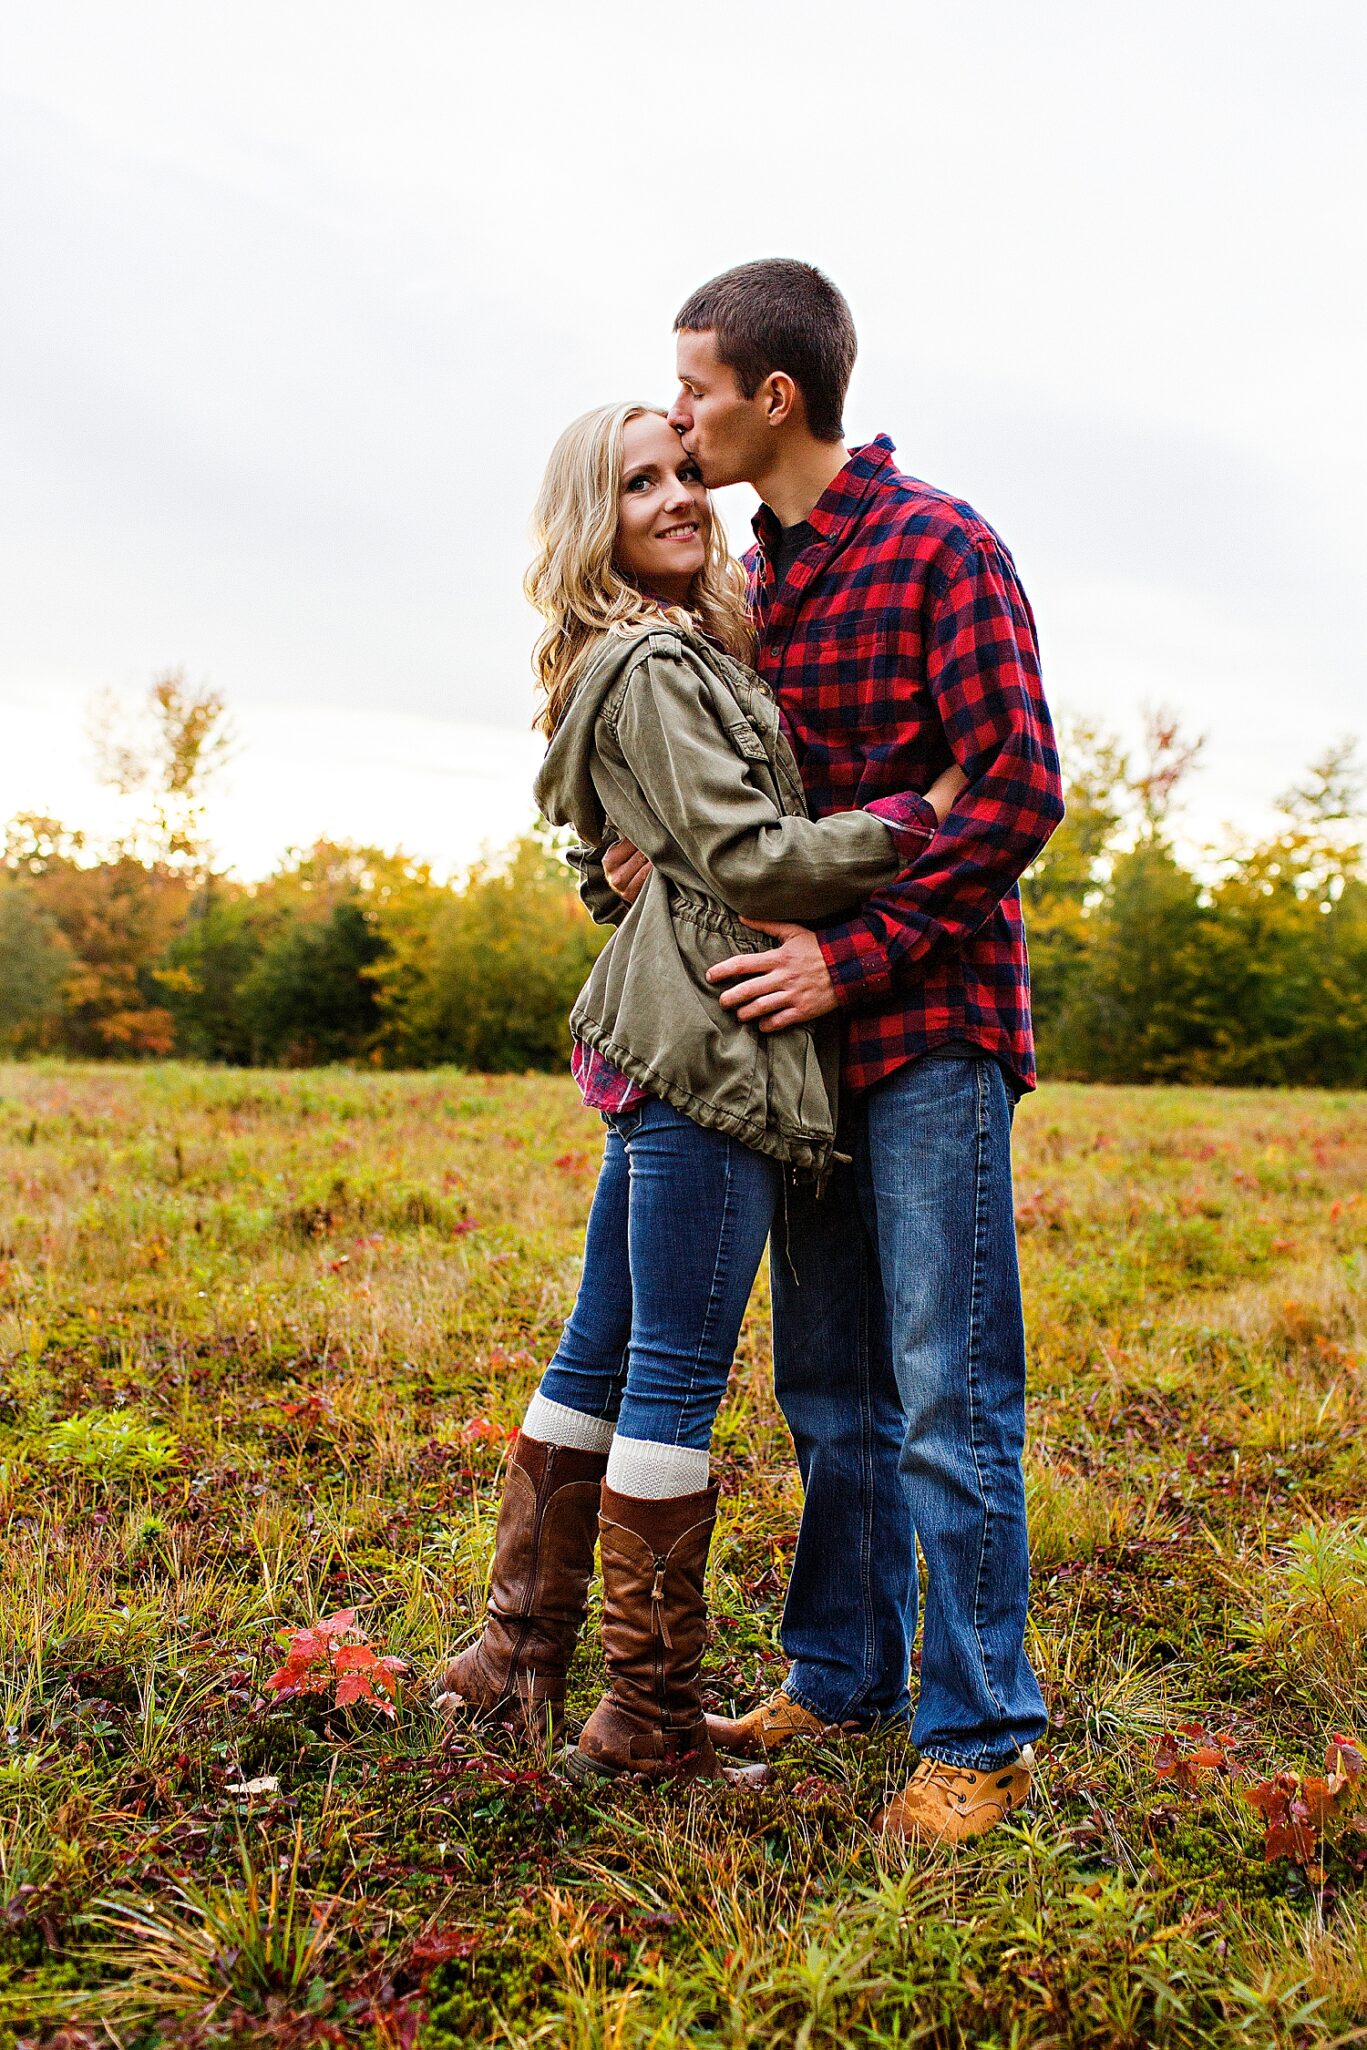 Max kissing Lauren's forehead during Fall engagement photos in Maine